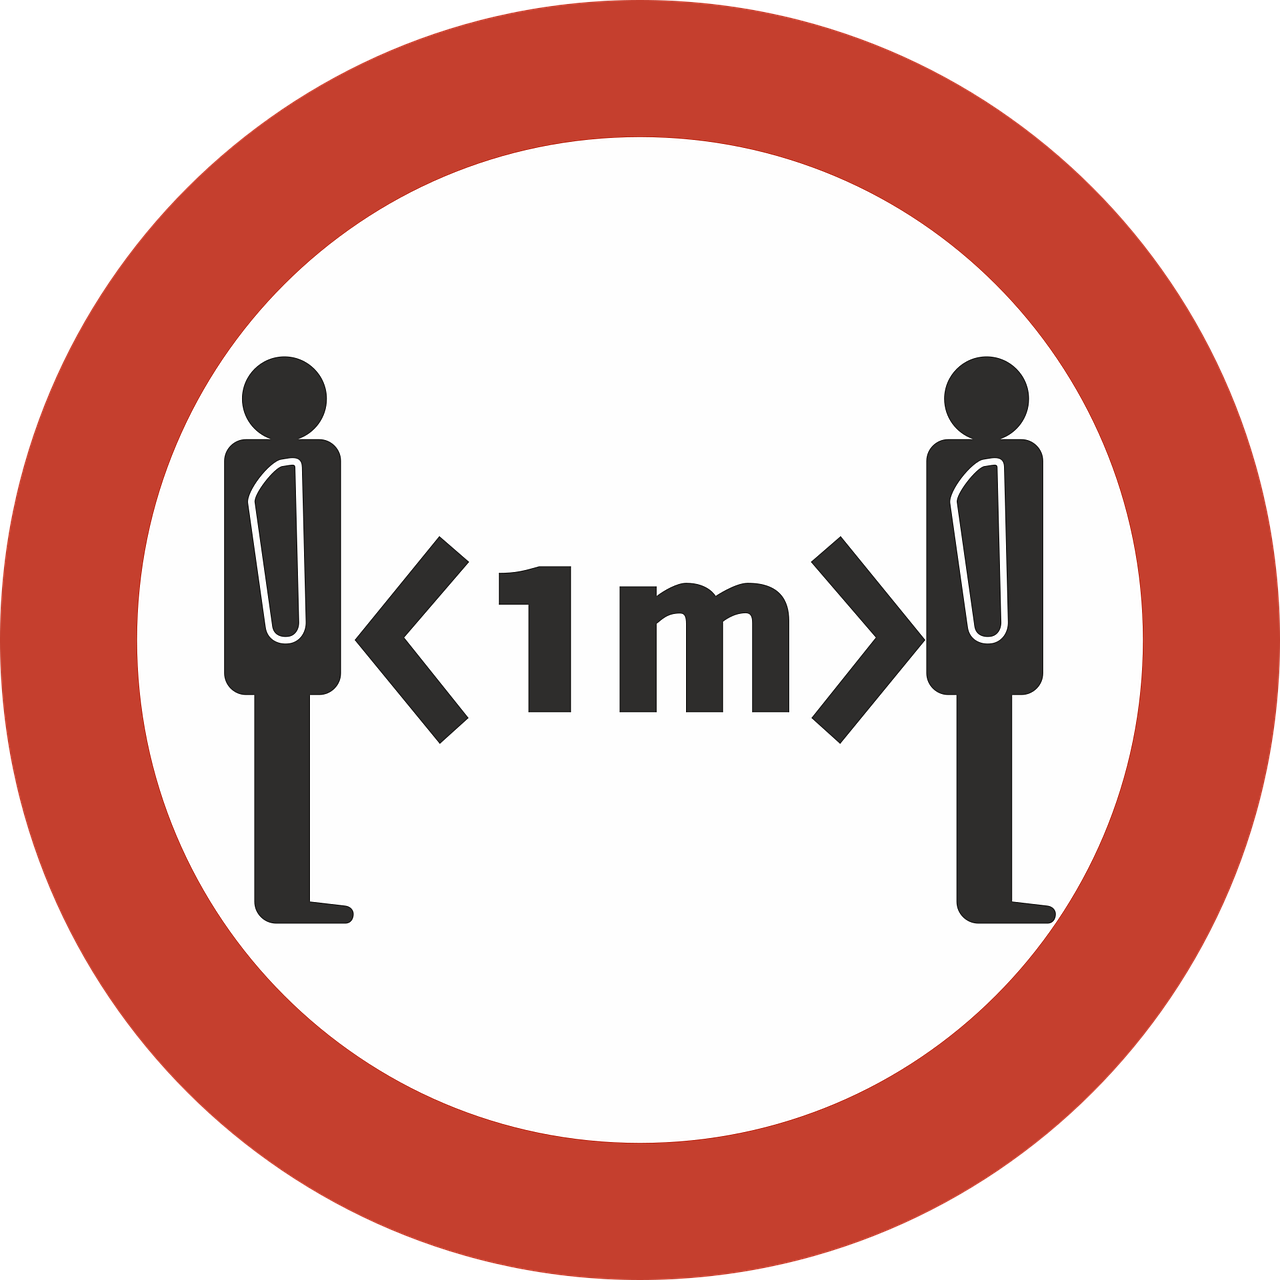 a red and white sign with two men standing next to each other, by Mirko Rački, pixabay, excessivism, mathematical interlocking, siting on a toilet, on a flat color black background, 1km tall